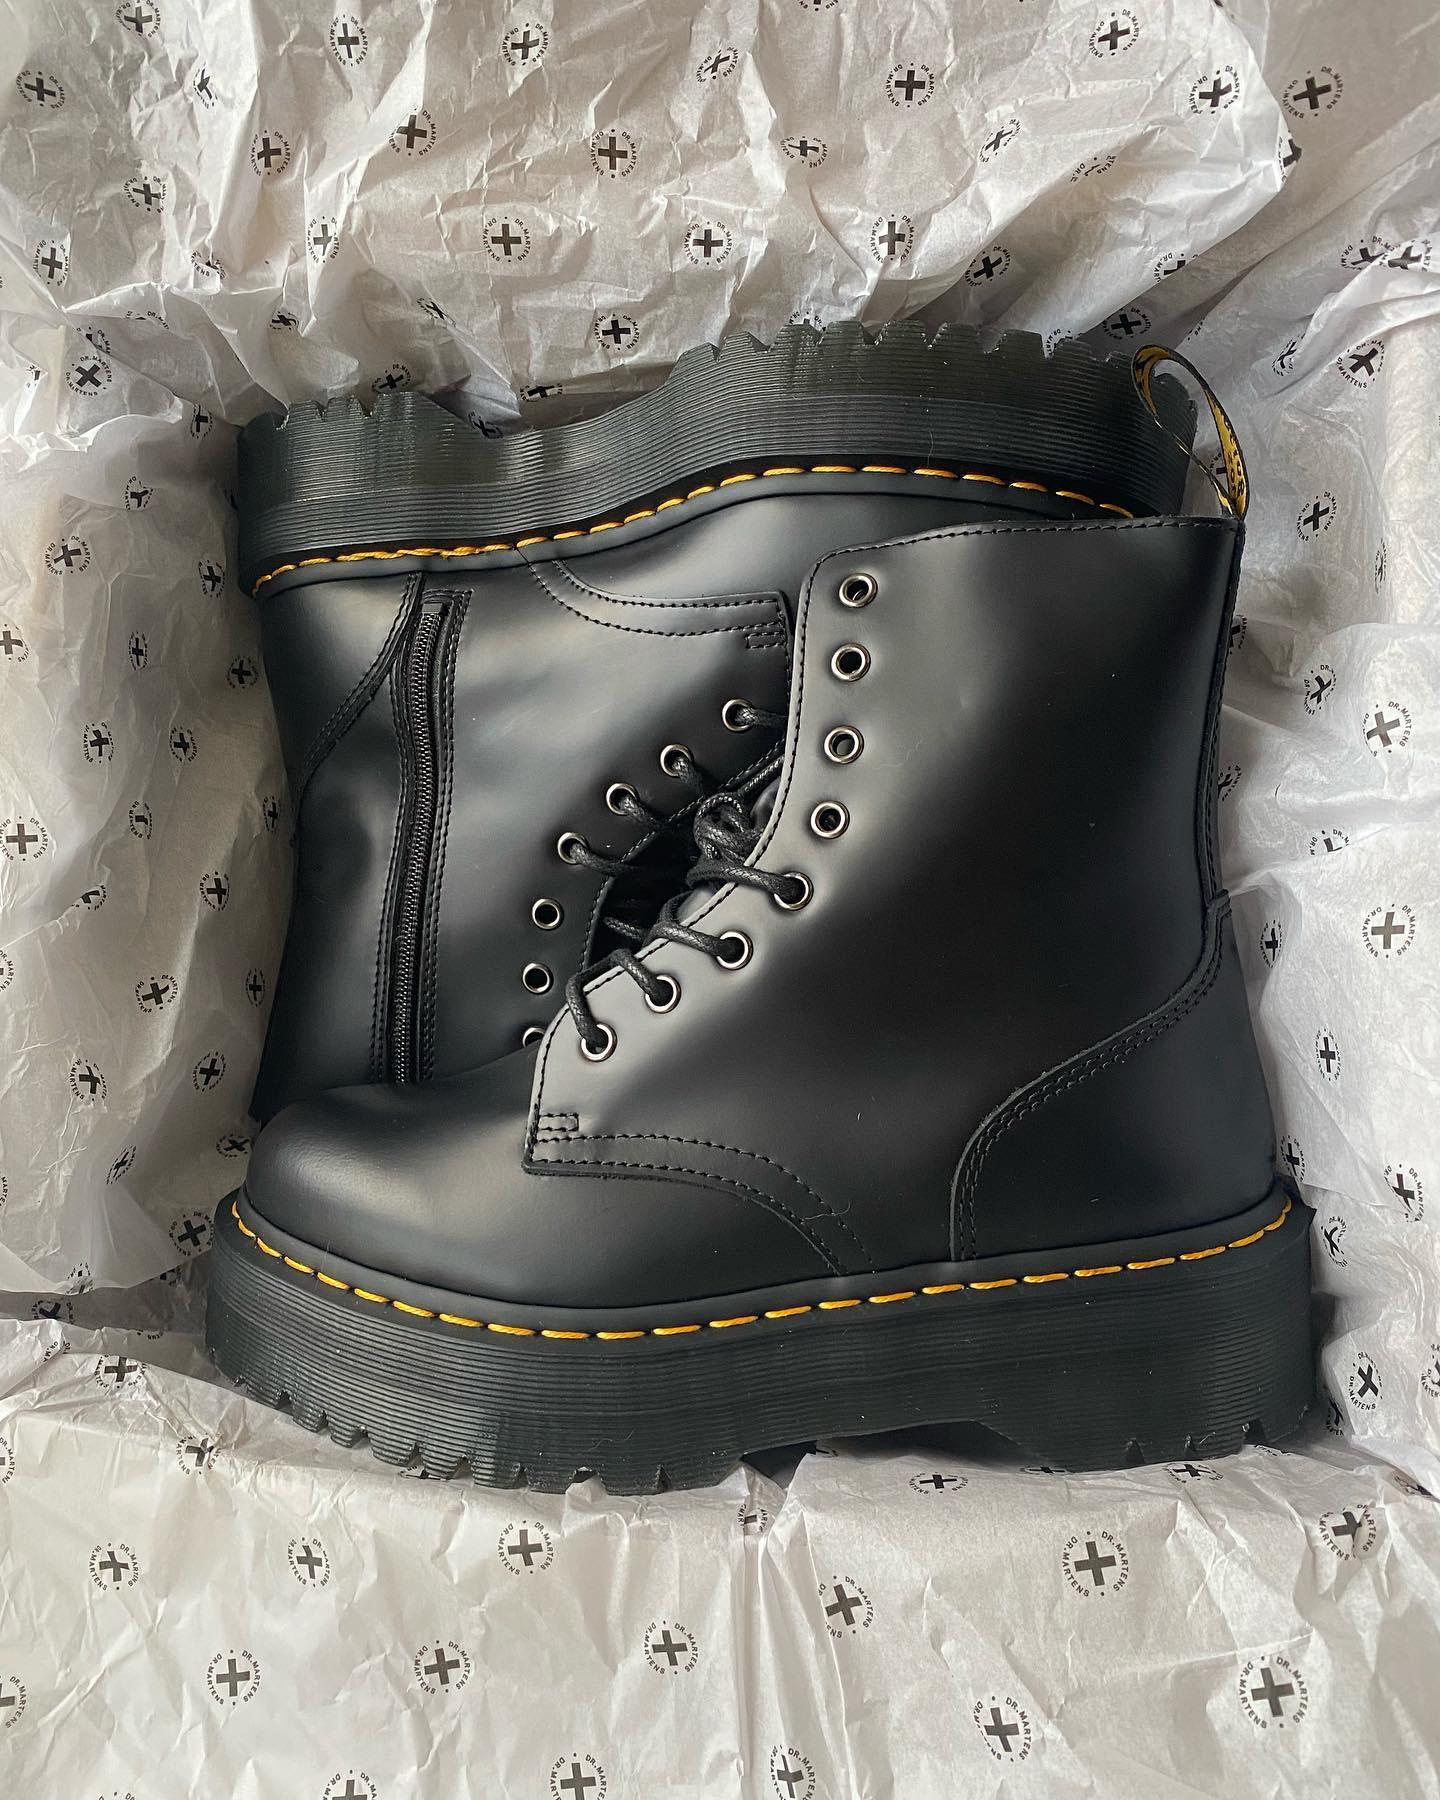 Zeep Koninklijke familie Kan worden genegeerd Dr. Martens on Twitter: "Which Docs are you hoping to find under the tree  this year? https://t.co/SL3VxWOz1D" / Twitter